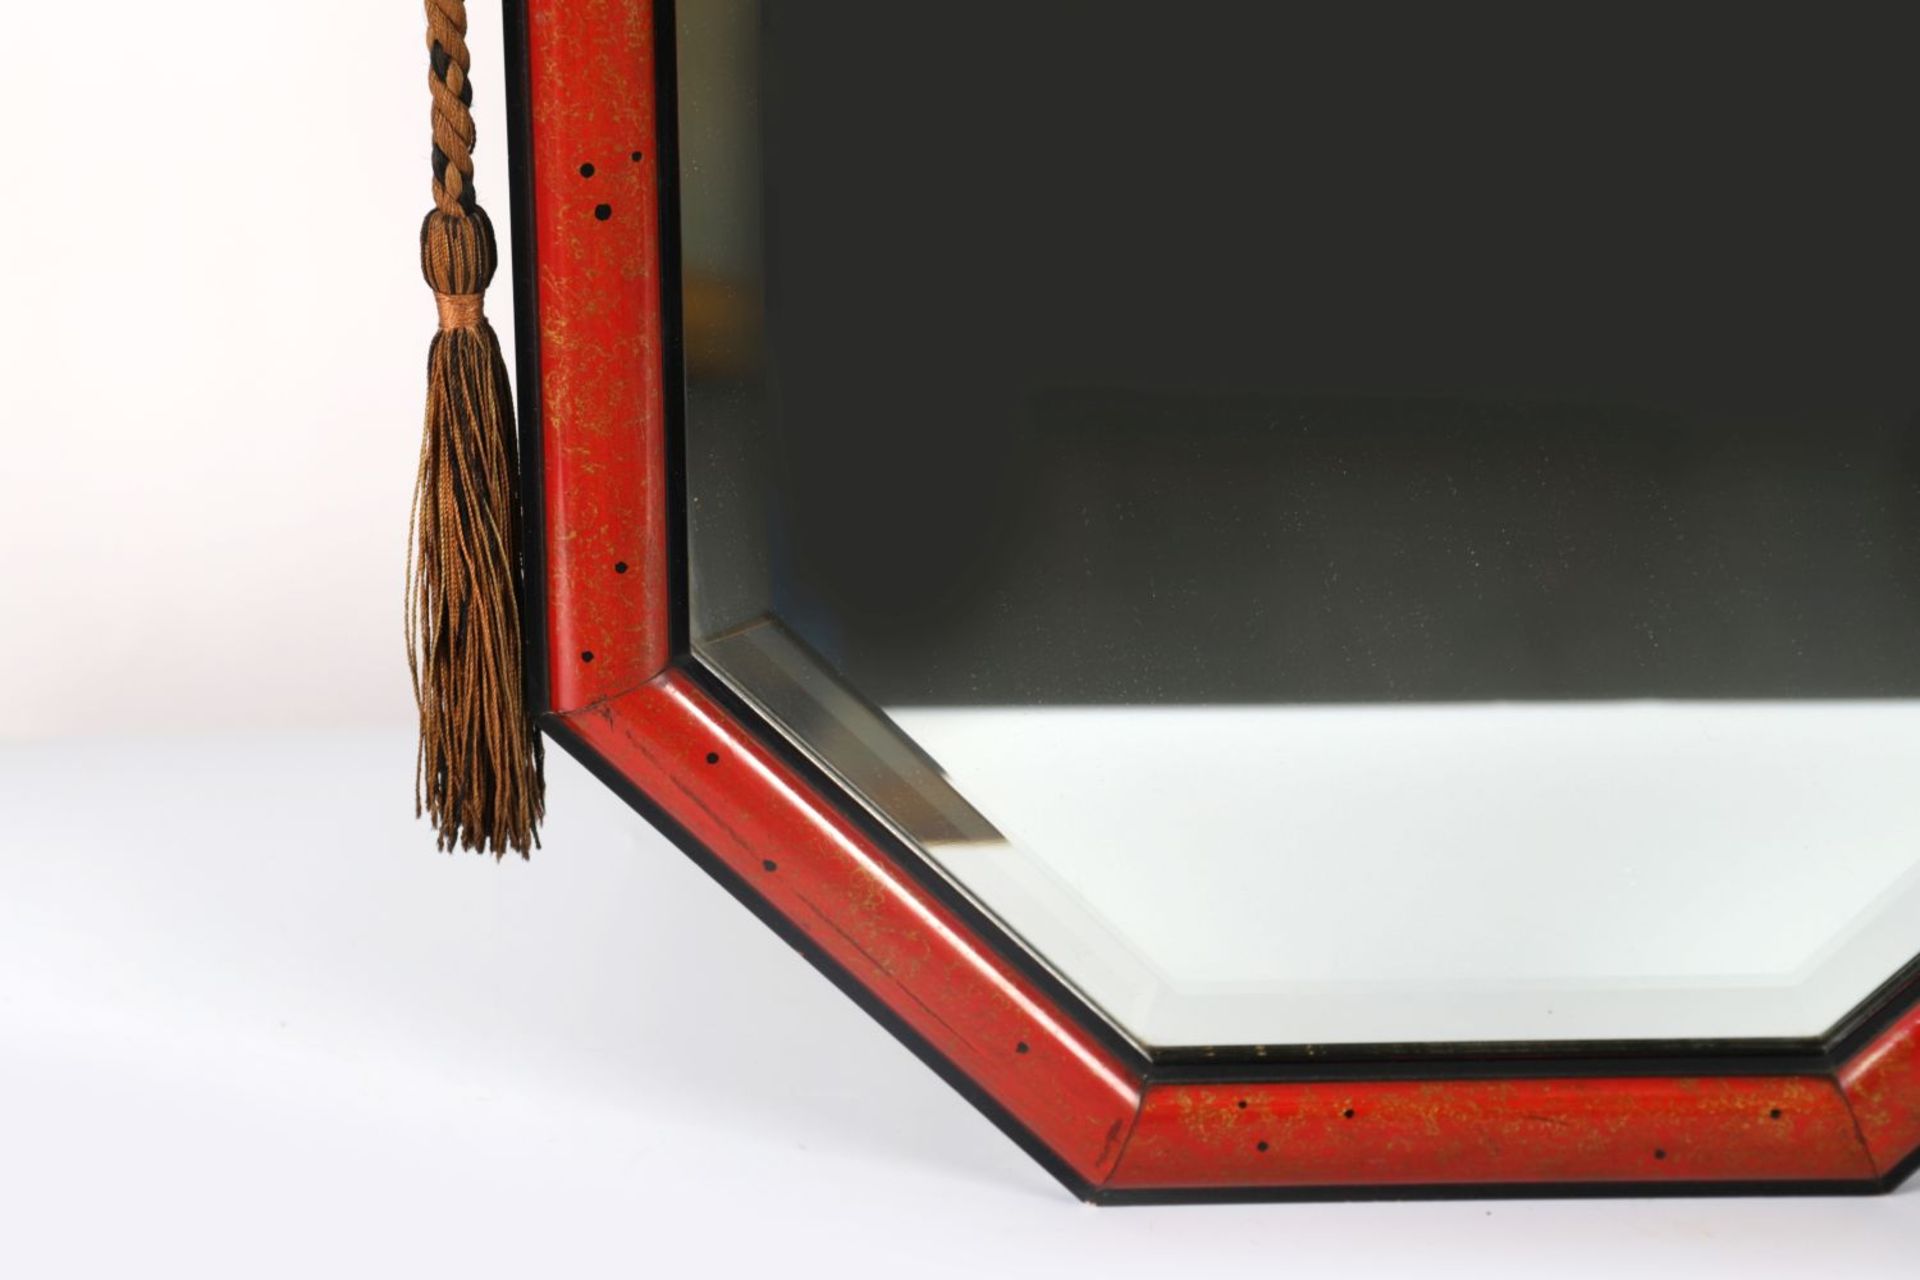 EDWARDIAN LACQUERED FRAMED MIRROR - Image 3 of 3